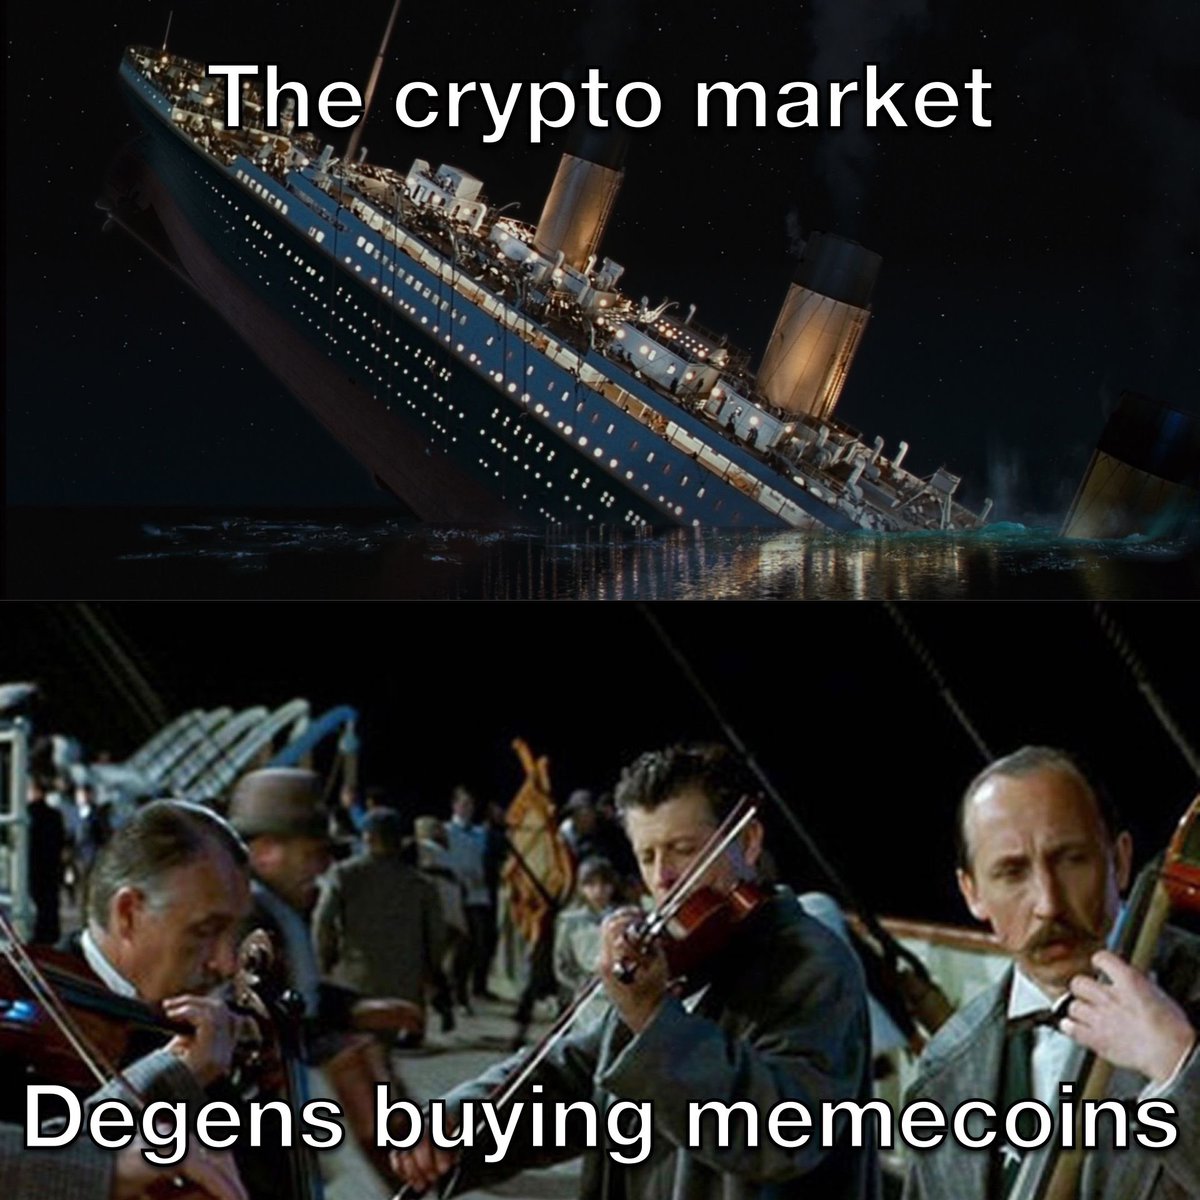 The state of the market right now: